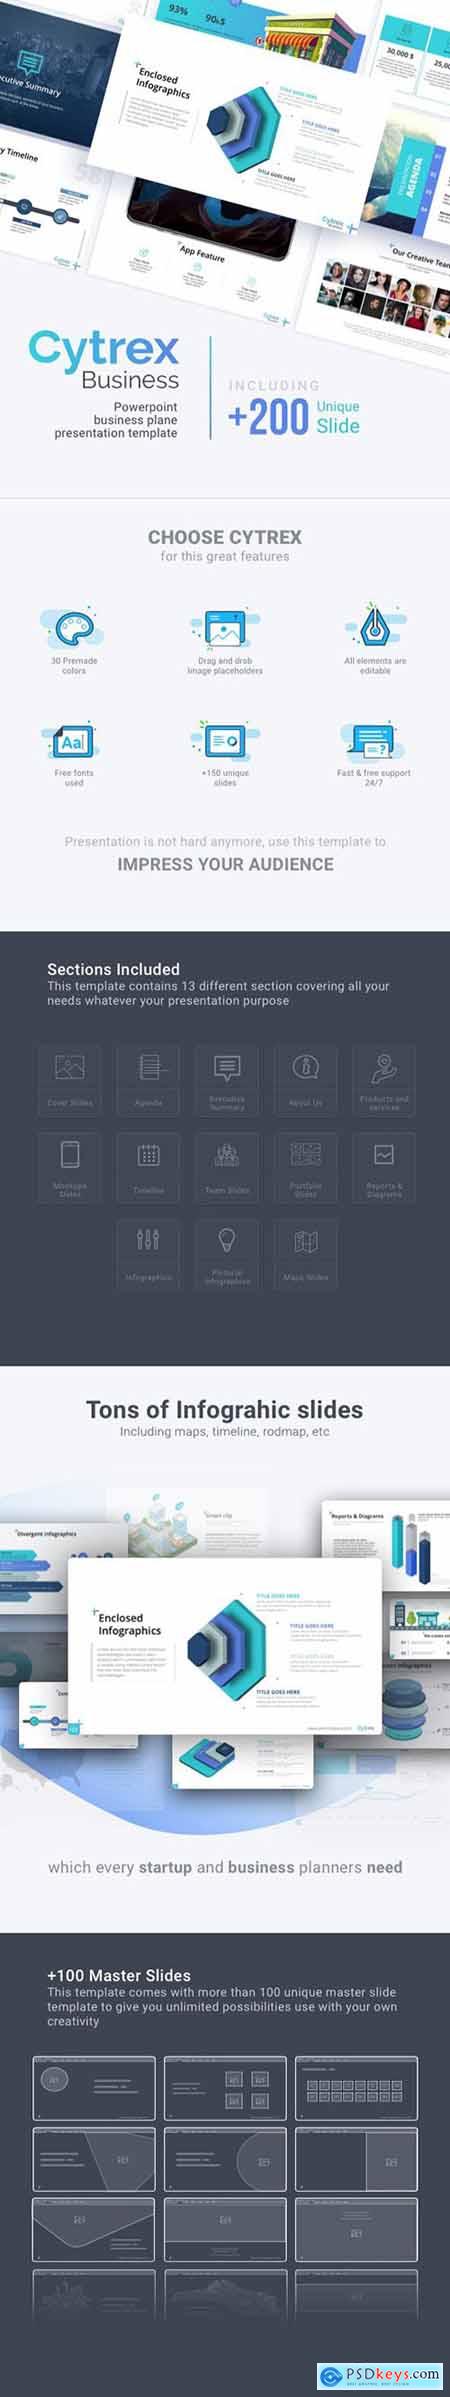 Graphicriver Cytrex - Business Plan PowerPoint Template